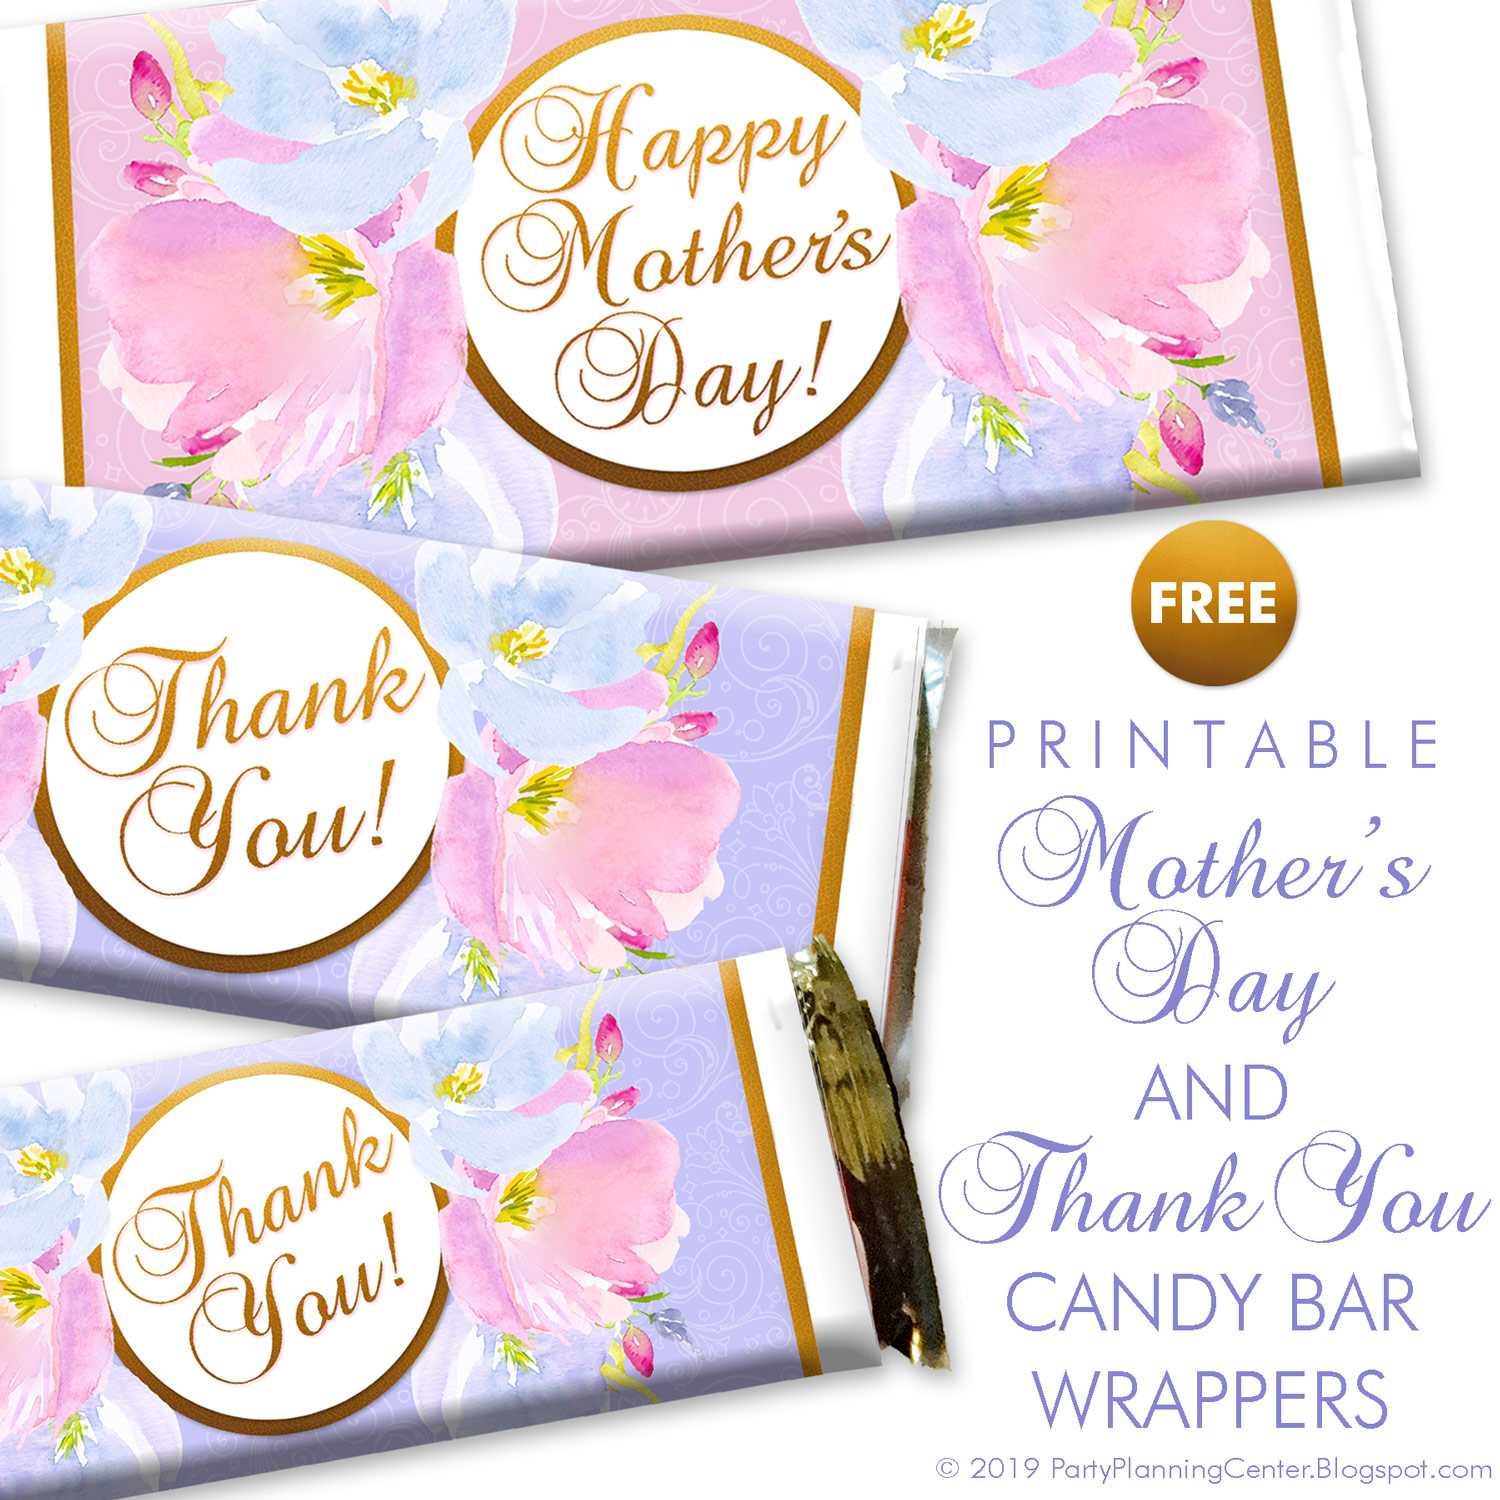 Party Planning: Mother's Day And Thank You Chocolate Bar Intended For Candy Bar Wrapper Template Microsoft Word